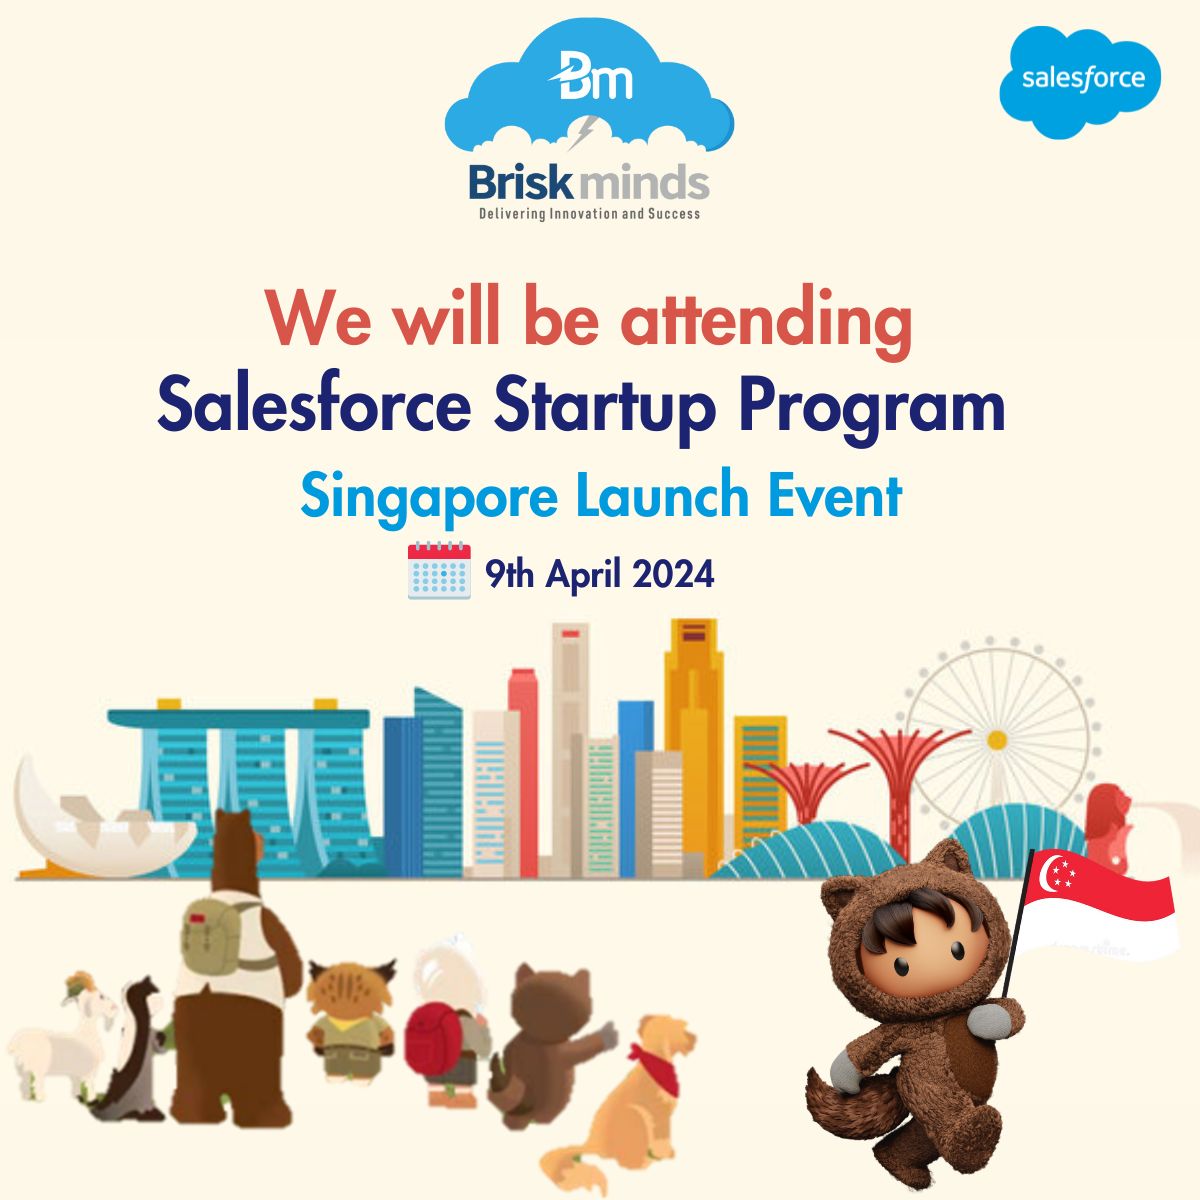 🚀Excited to announce that @Briskminds is gearing up to attend the #Salesforce Startup Program | Singapore Launch Event! Ready to explore new opportunities and innovations in the heart of tech entrepreneurship ☁️🌟🌟 #SalesforceStartup #SingaporeLaunch #Briskminds #salesforce…